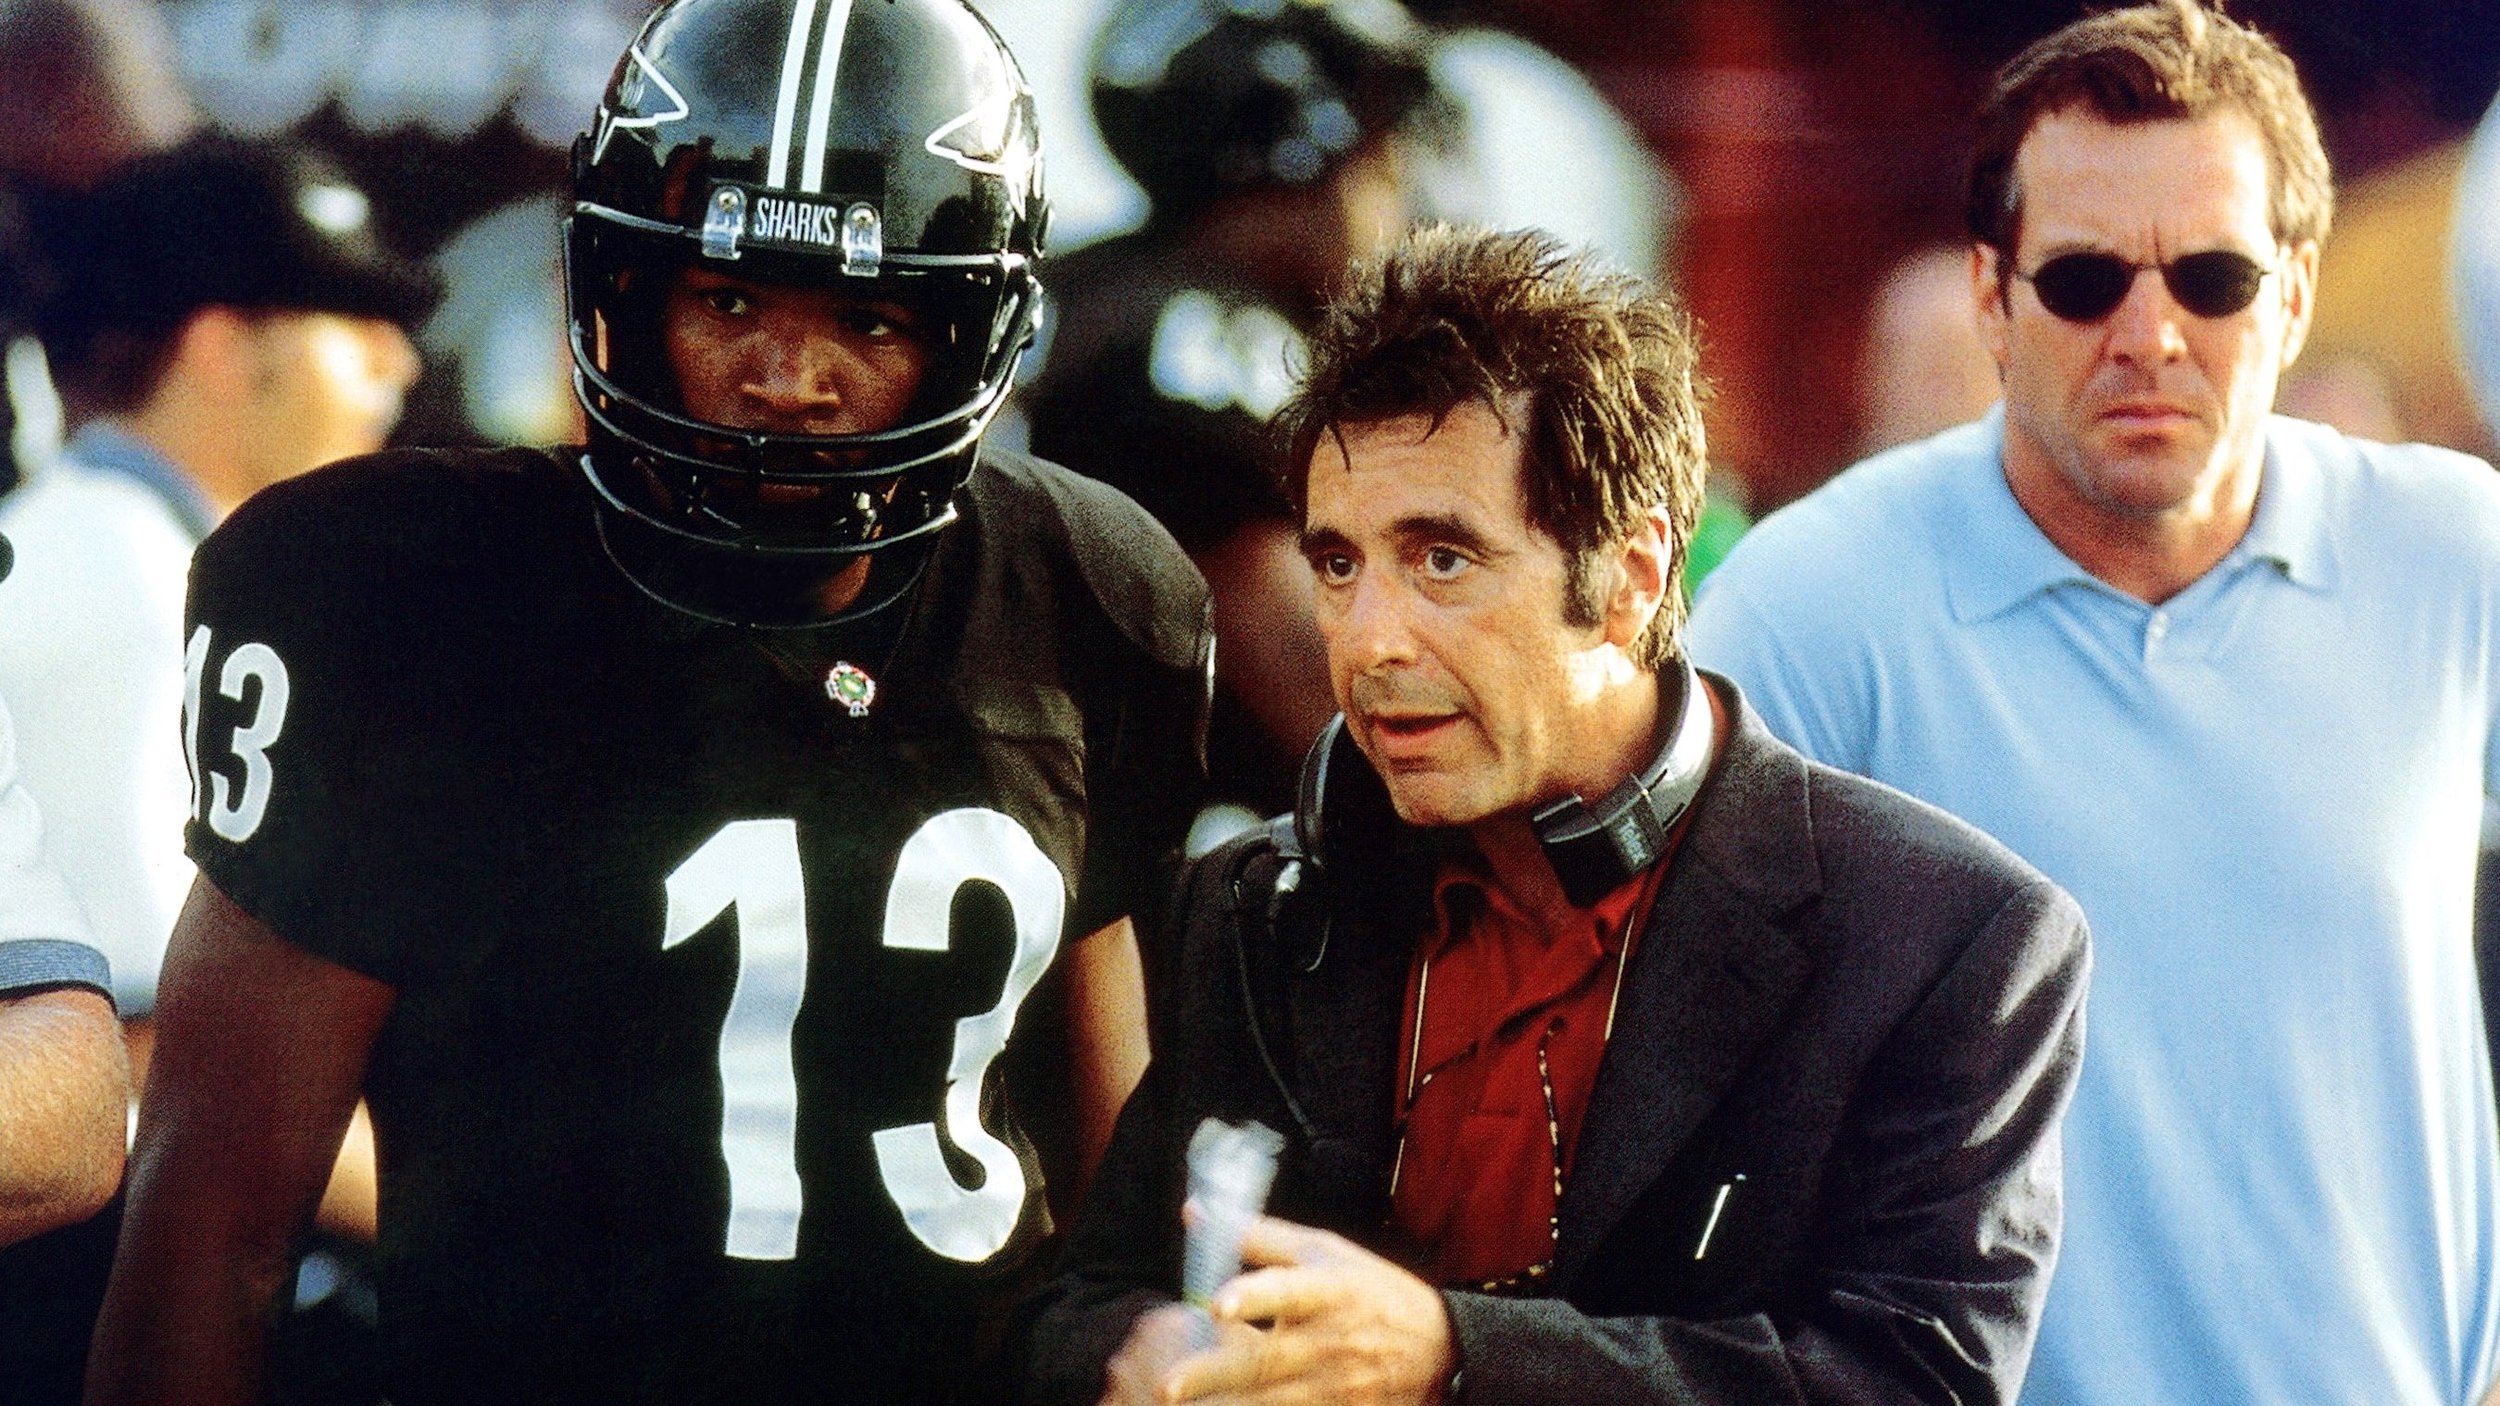 <p>Oliver Stone seems to have no interest in creating a realistic football movie. He’s not really interested in portraying anything realistically, to be fair. Plus, he’s got Al Pacino at his most “Al Pacino.” That being said, the combo of Stone and Pacino led to some crazy, memorable moments, including a speech that become one of the more legendary inspirational speeches in sports movie history.</p><p>You may also like: <a href='https://www.yardbarker.com/nfl/articles/the_25_greatest_dallas_cowboys_of_all_time_011324/s1__38499249'>The 25 greatest Dallas Cowboys of all time</a></p>